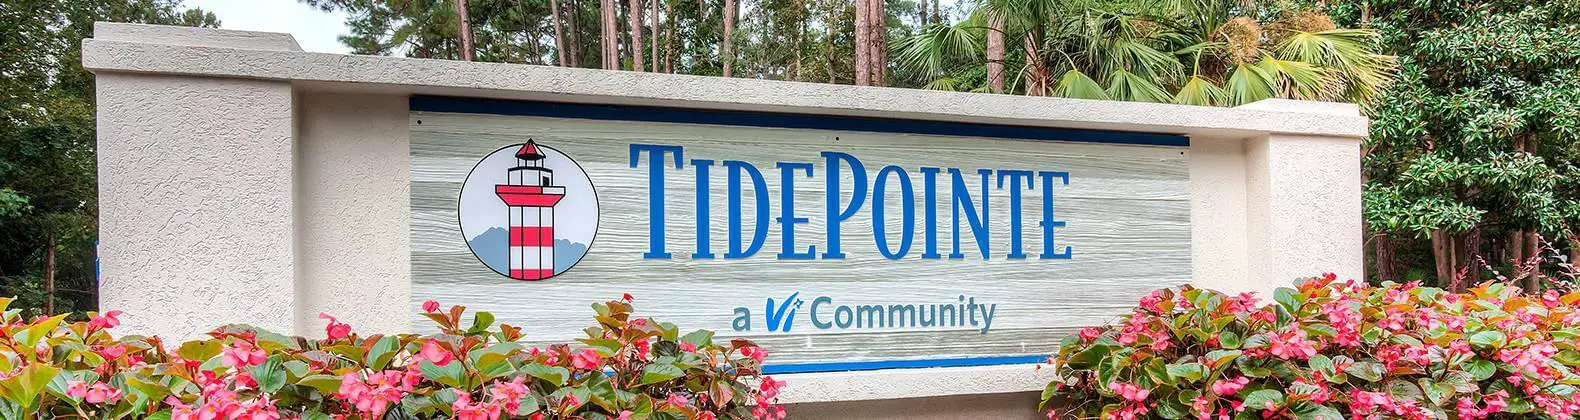 Photo of Hilton Head TidePointe, Assisted Living, Nursing Home, Independent Living, CCRC, Hilton Head Island, SC 6